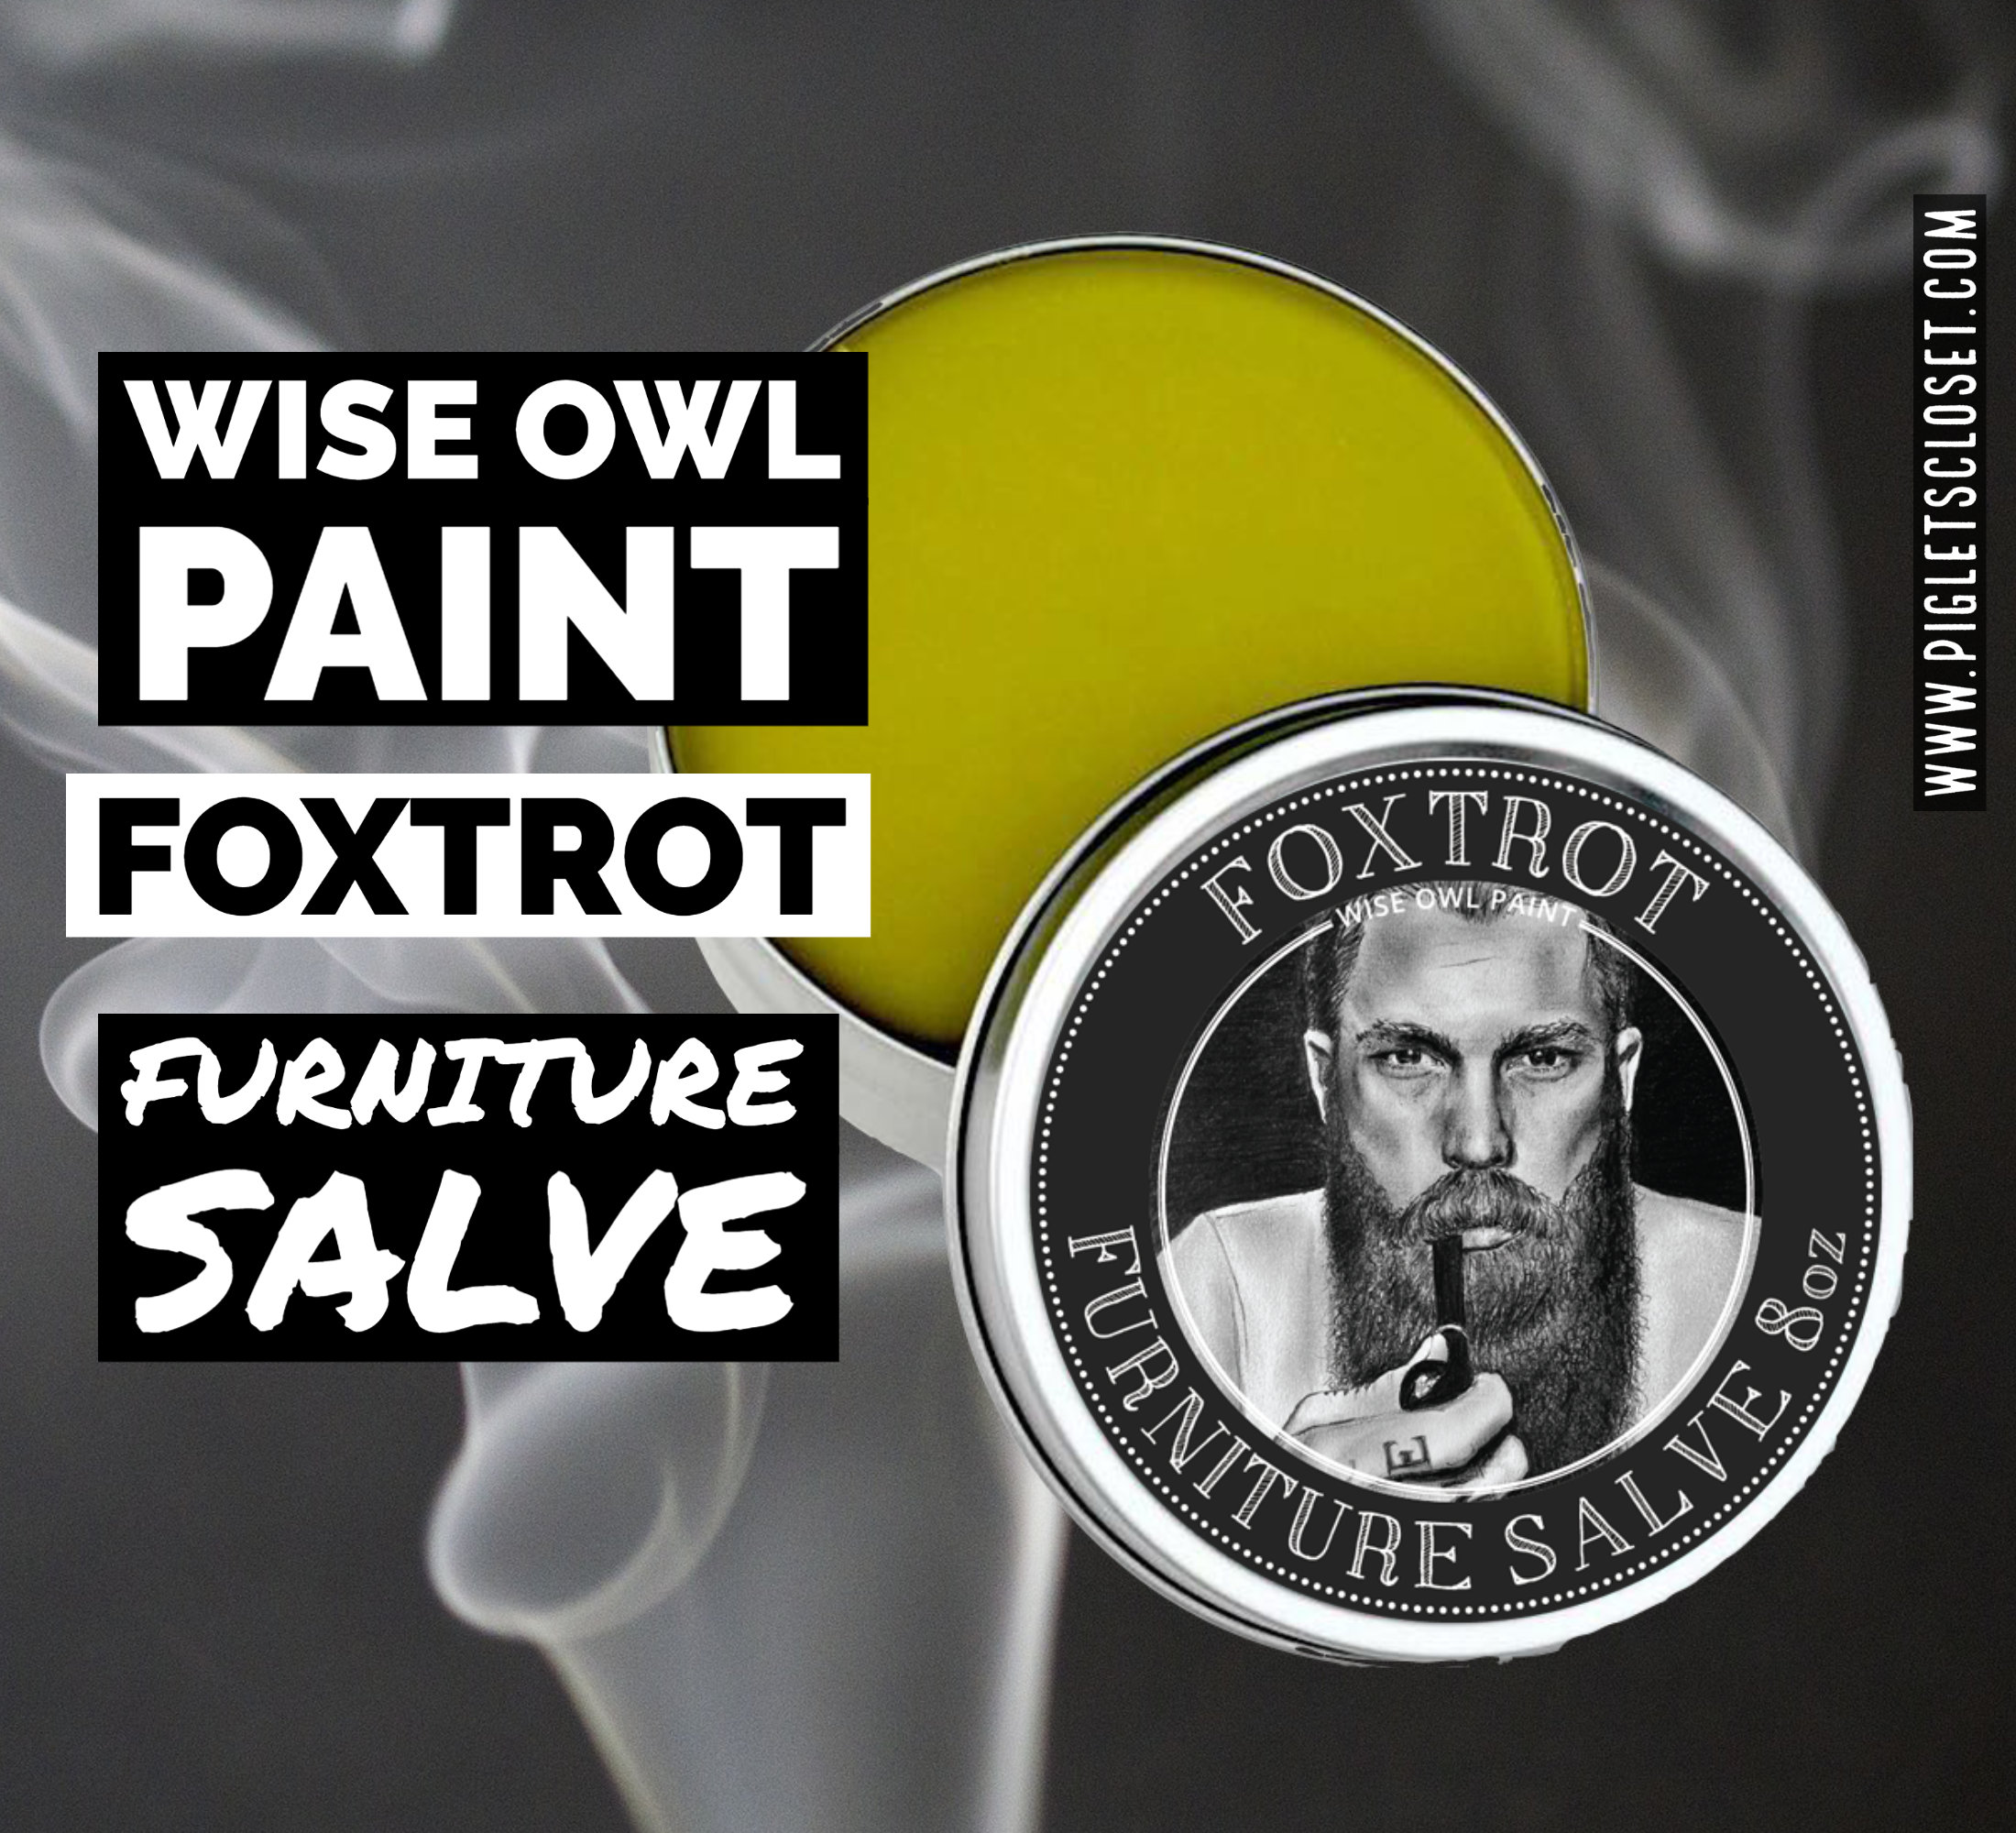 Wise Owl Natural Furniture Wax